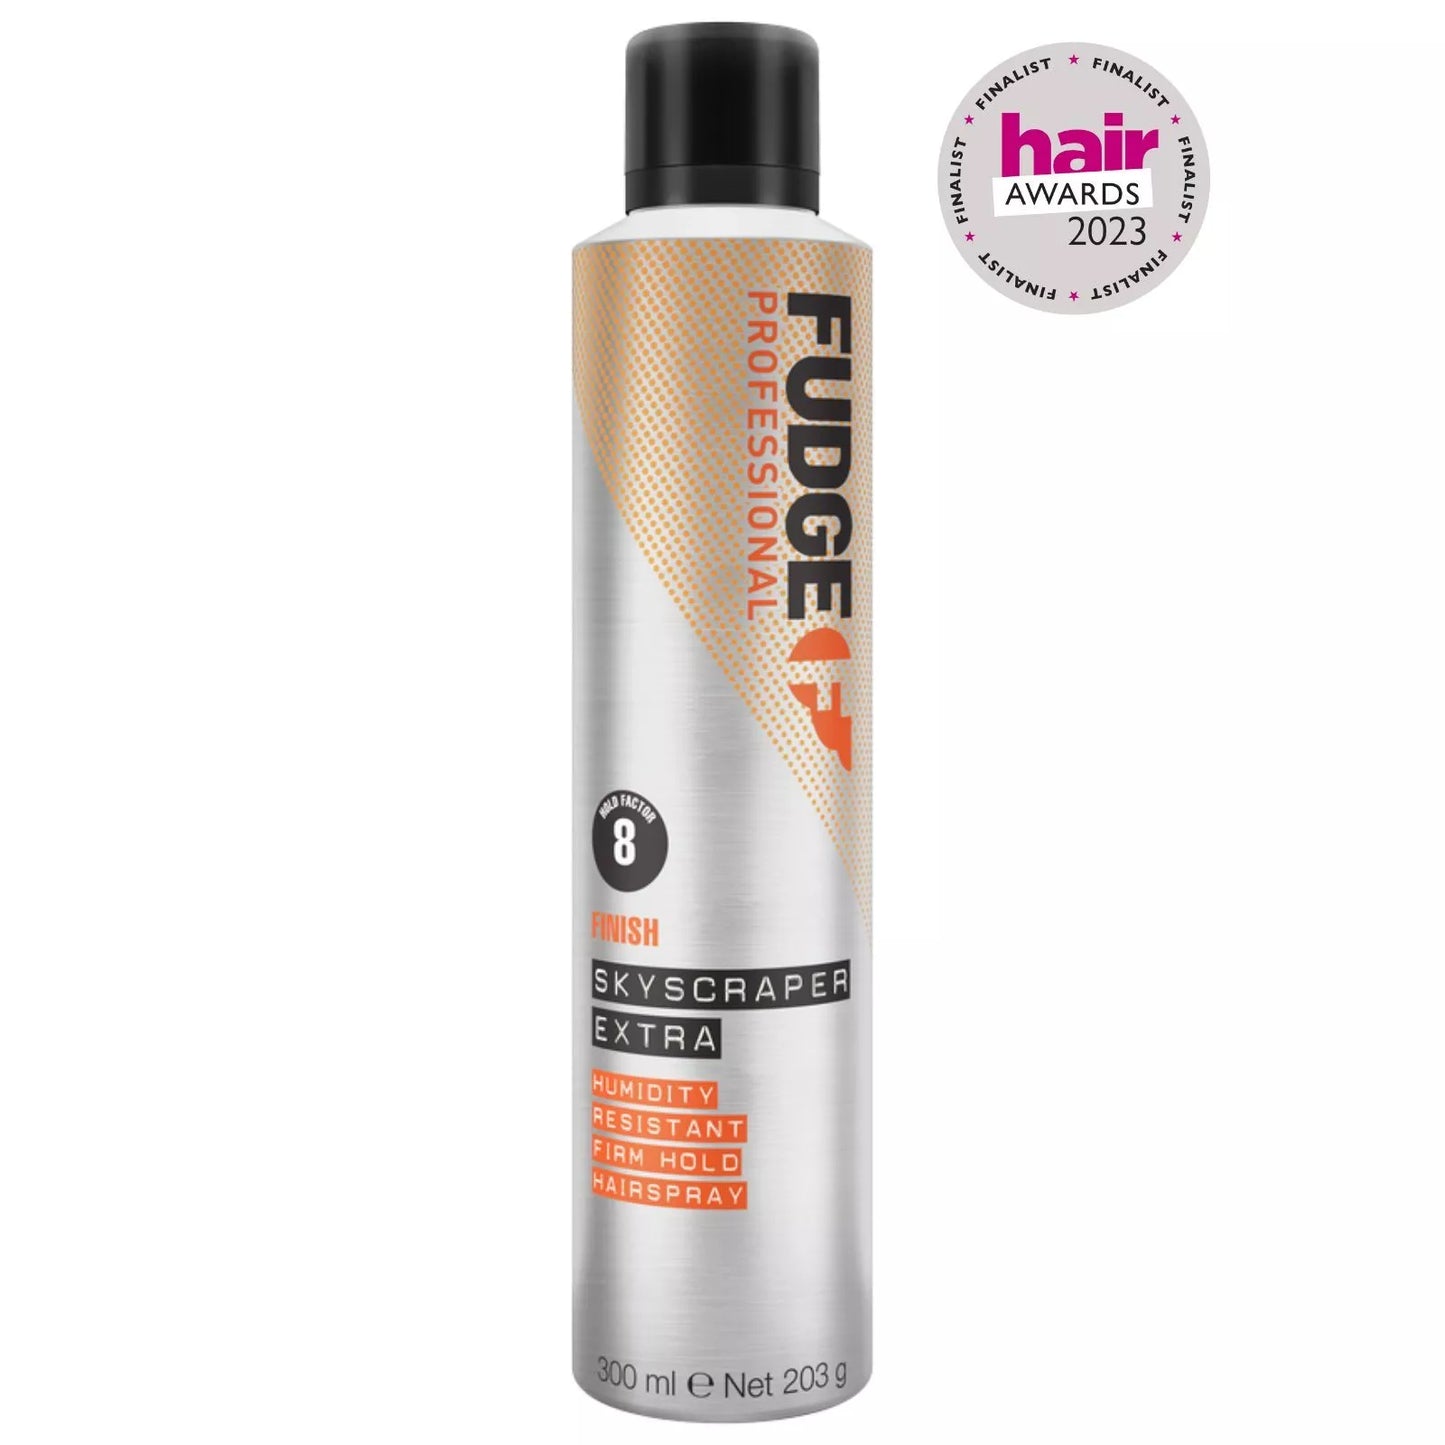 FUDGE Skyscraper Extra Humidity Resistant Firm Hold Hairspray 300ml